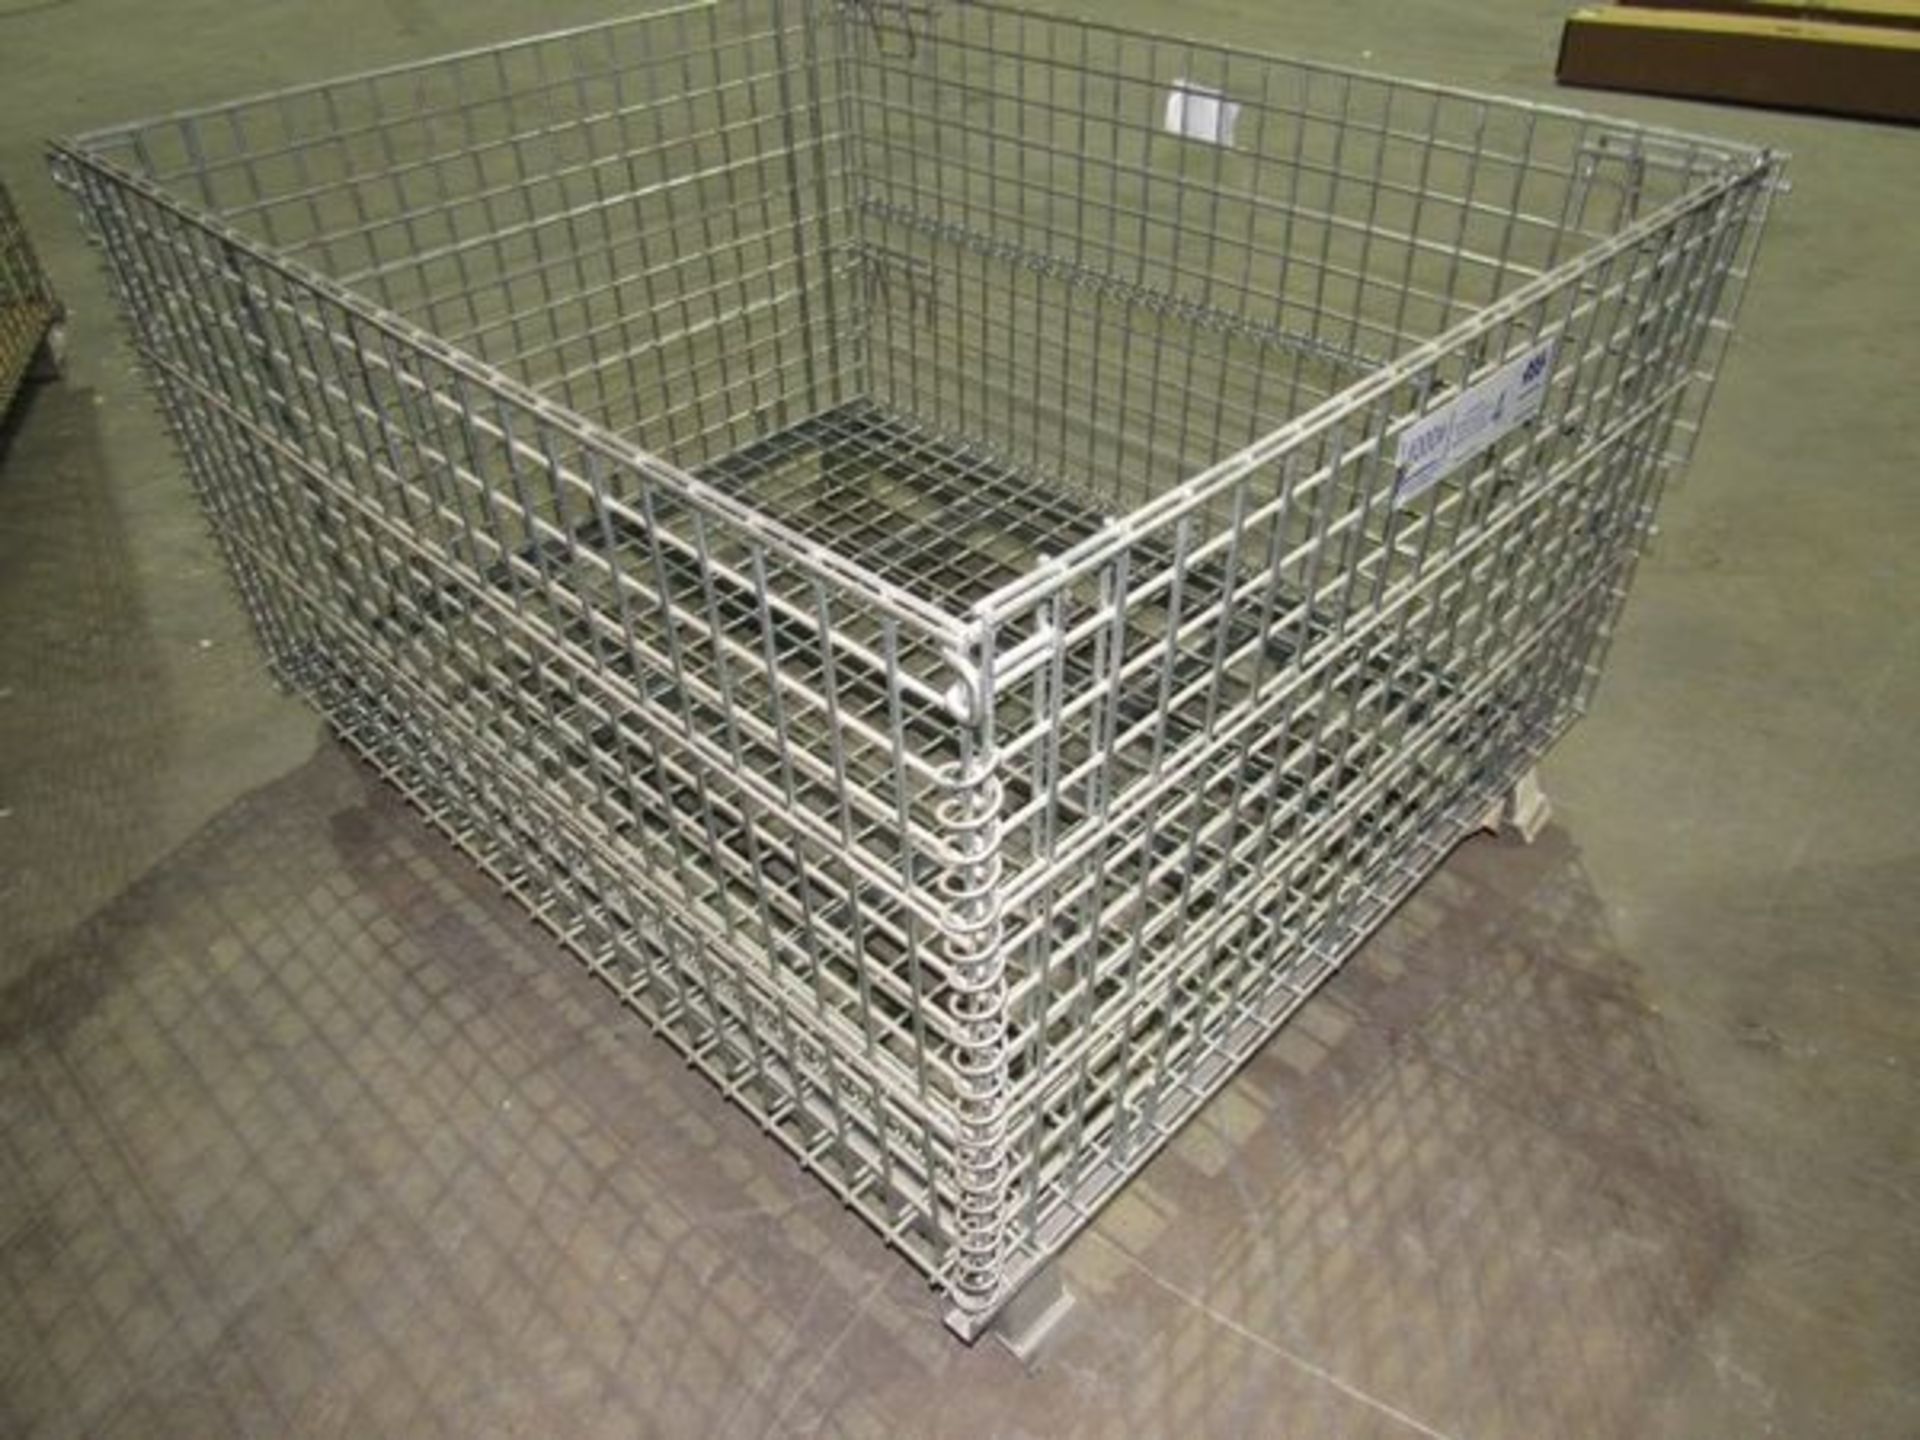 Warehouse Basket- MFR - Nashville Wire 48" x 40" x 31" **Contents SOLD Separately in Lot #1219** - Image 3 of 7